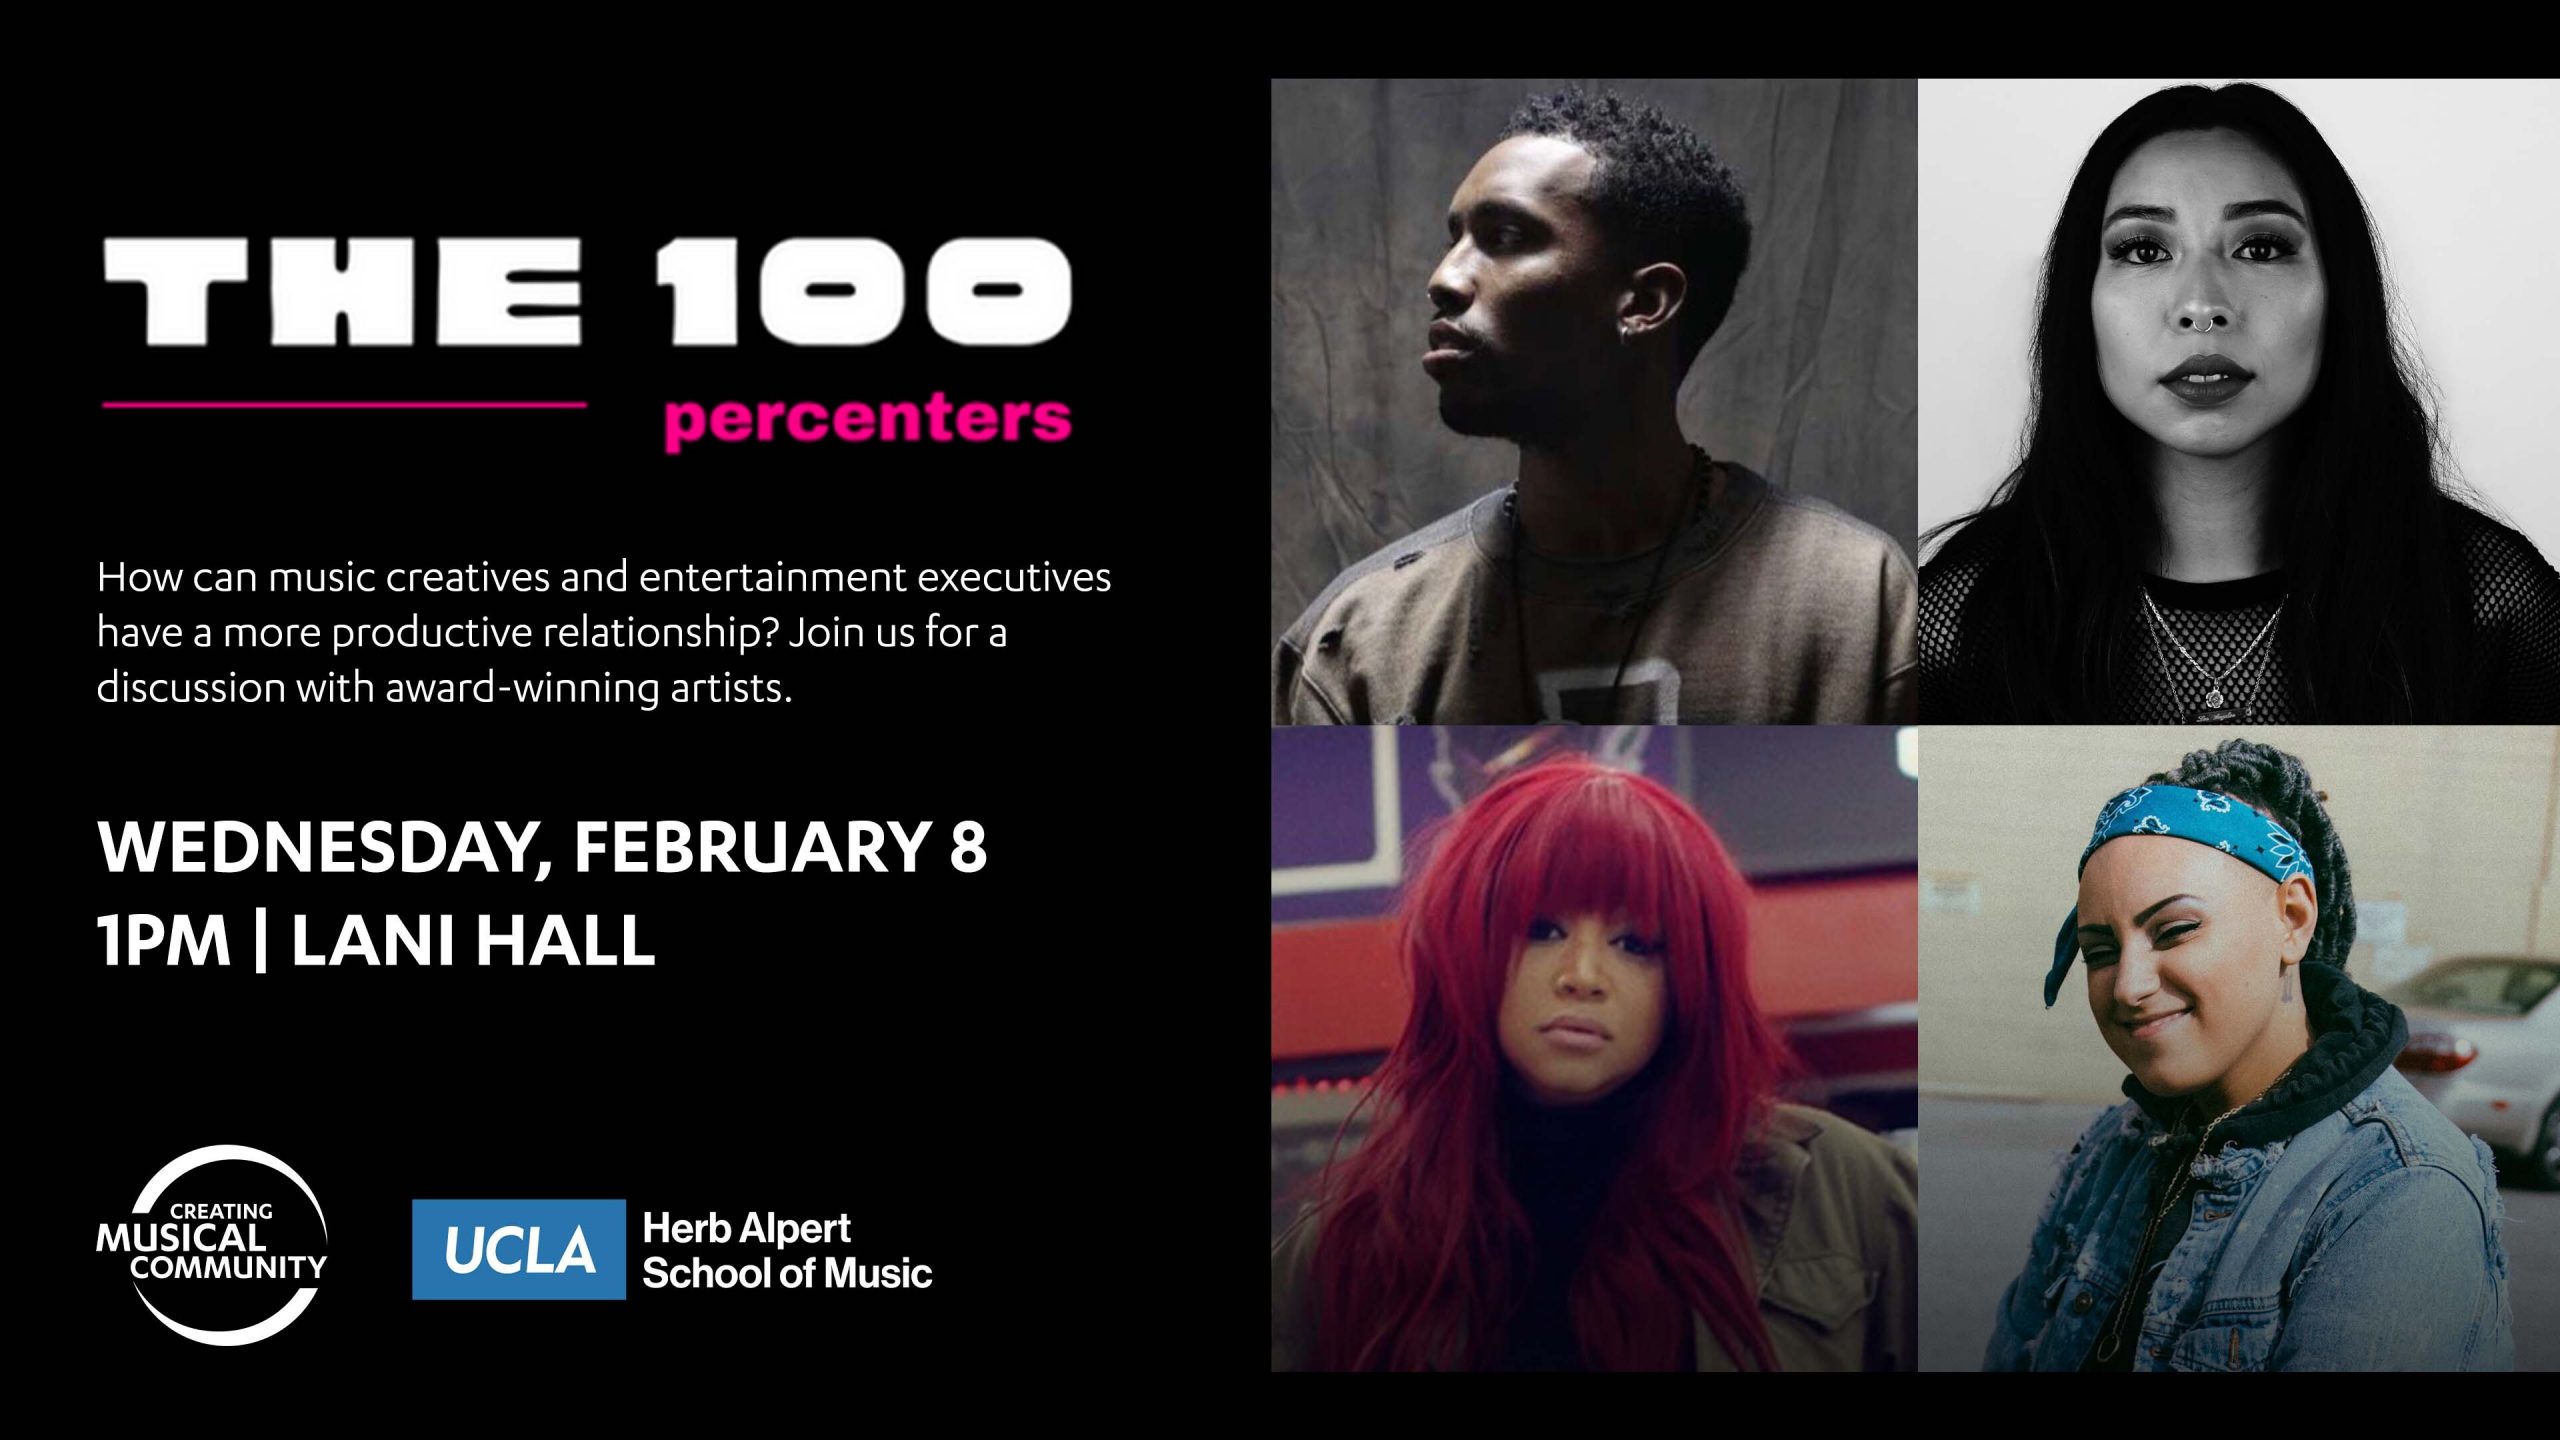 The 100 Percenters: a conversation with music industry innovators